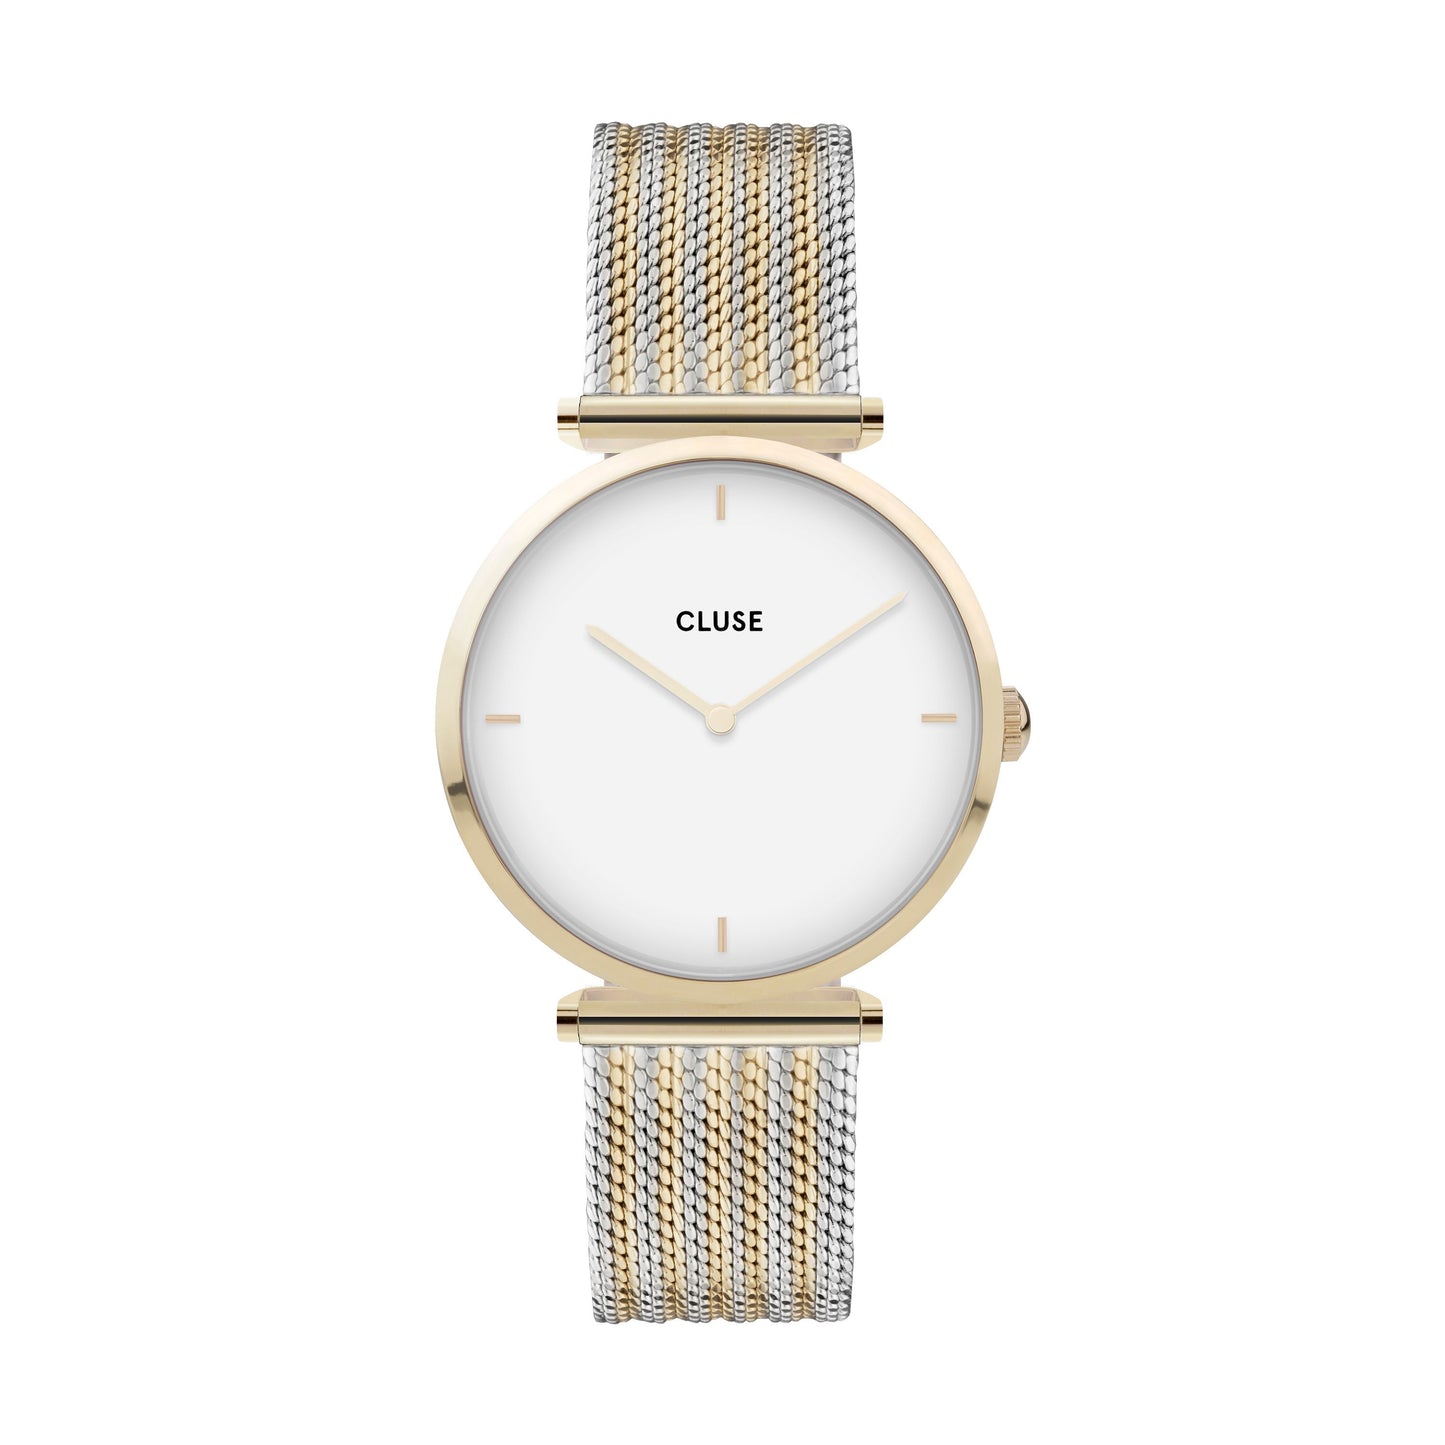 CLUSE GOLD + SILVER TRIOMPHE WATCH